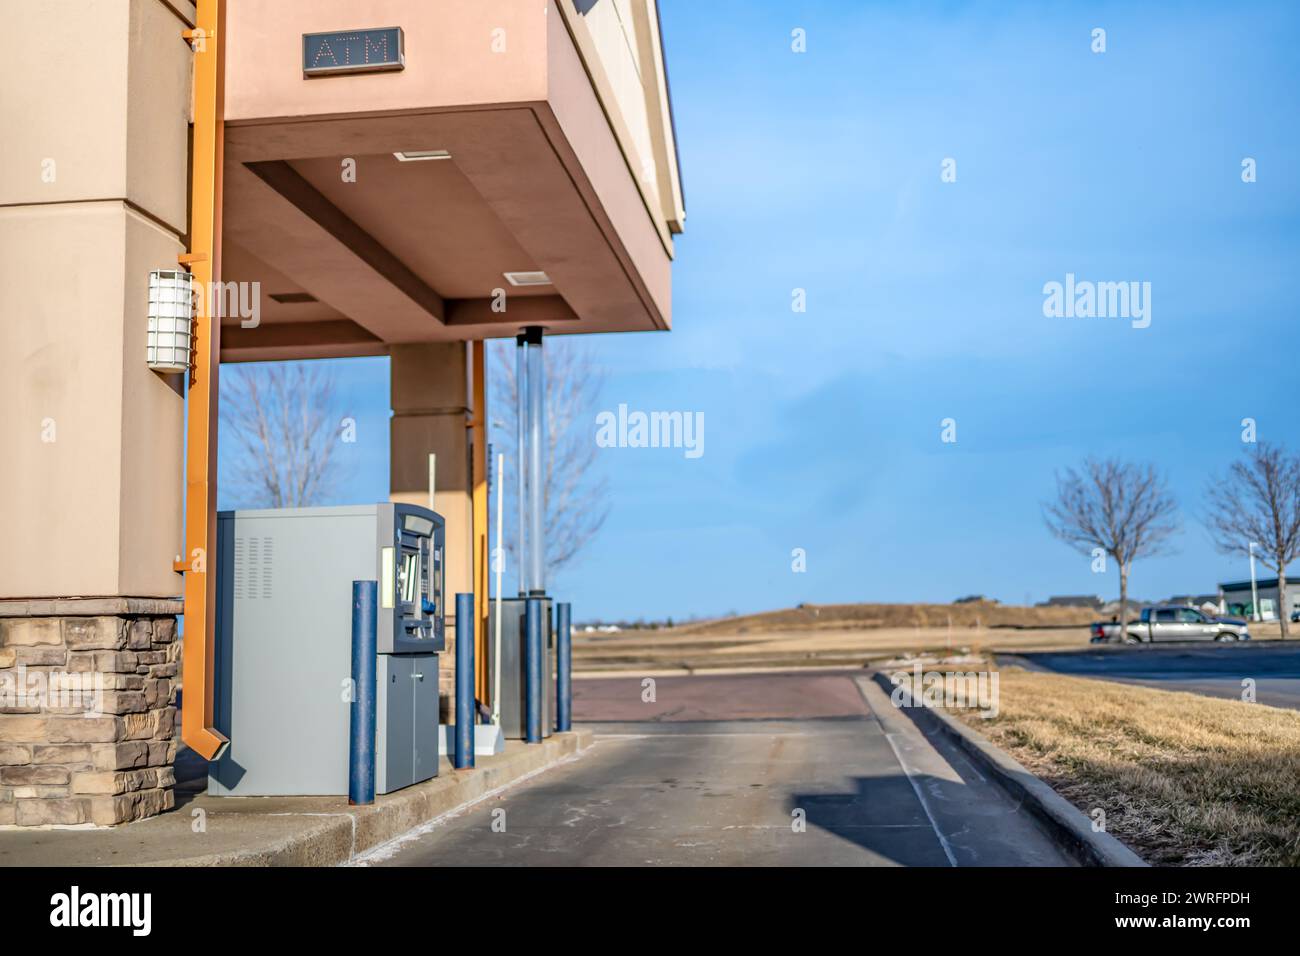 Banking automated teller machine lane in a small town Stock Photo